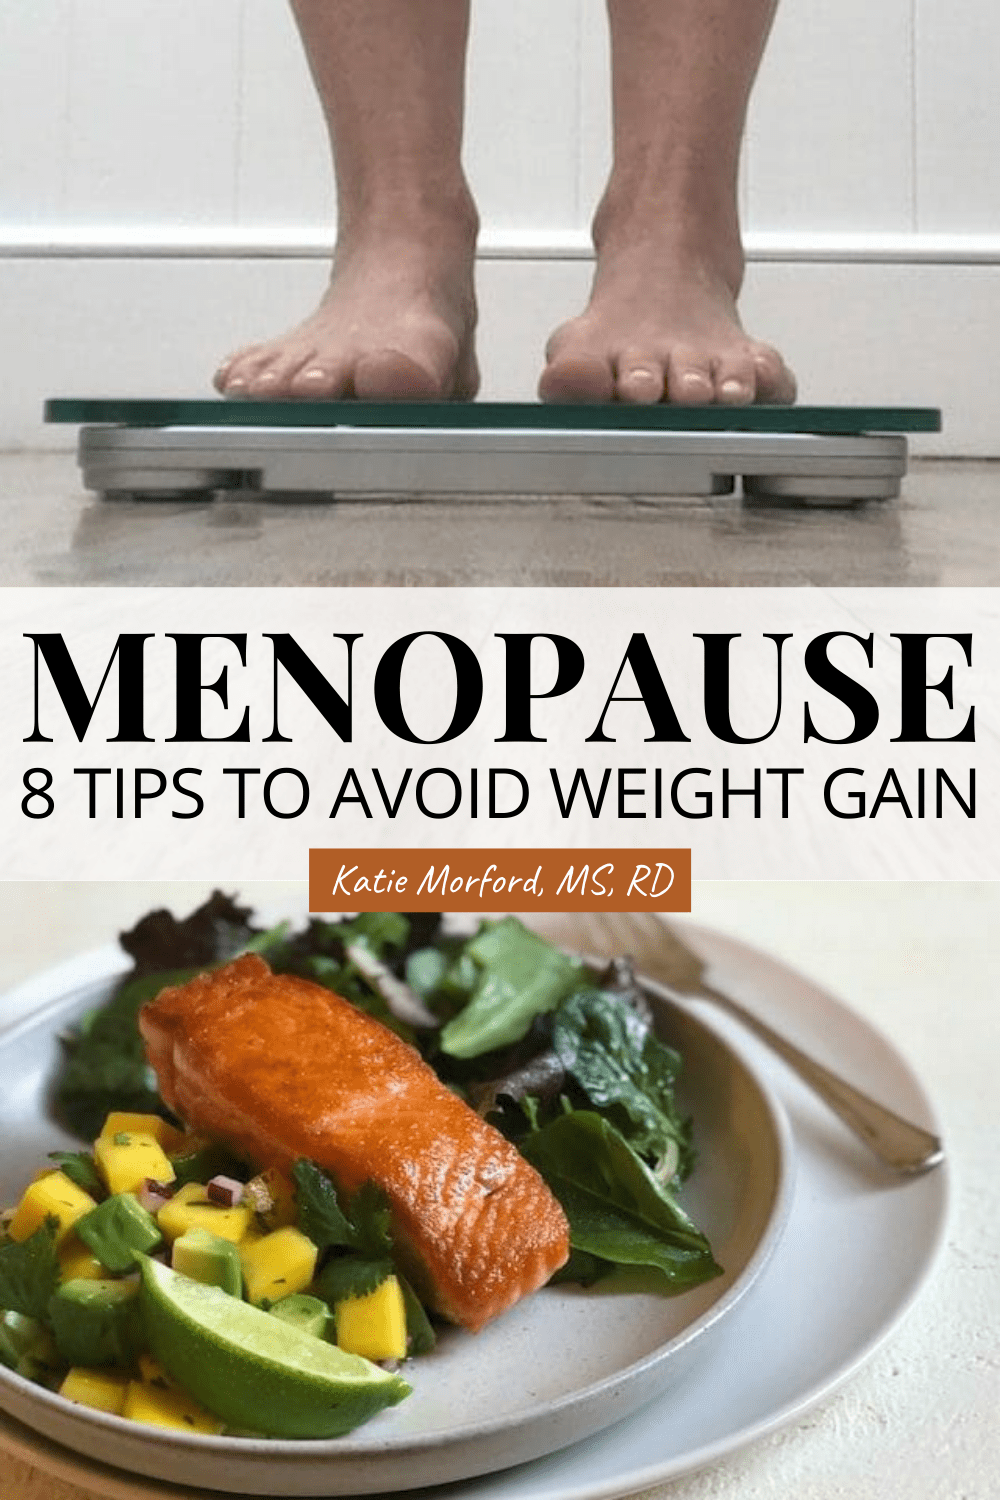 Menopause and Weight Gain: 8 Tips to Keep in Mind